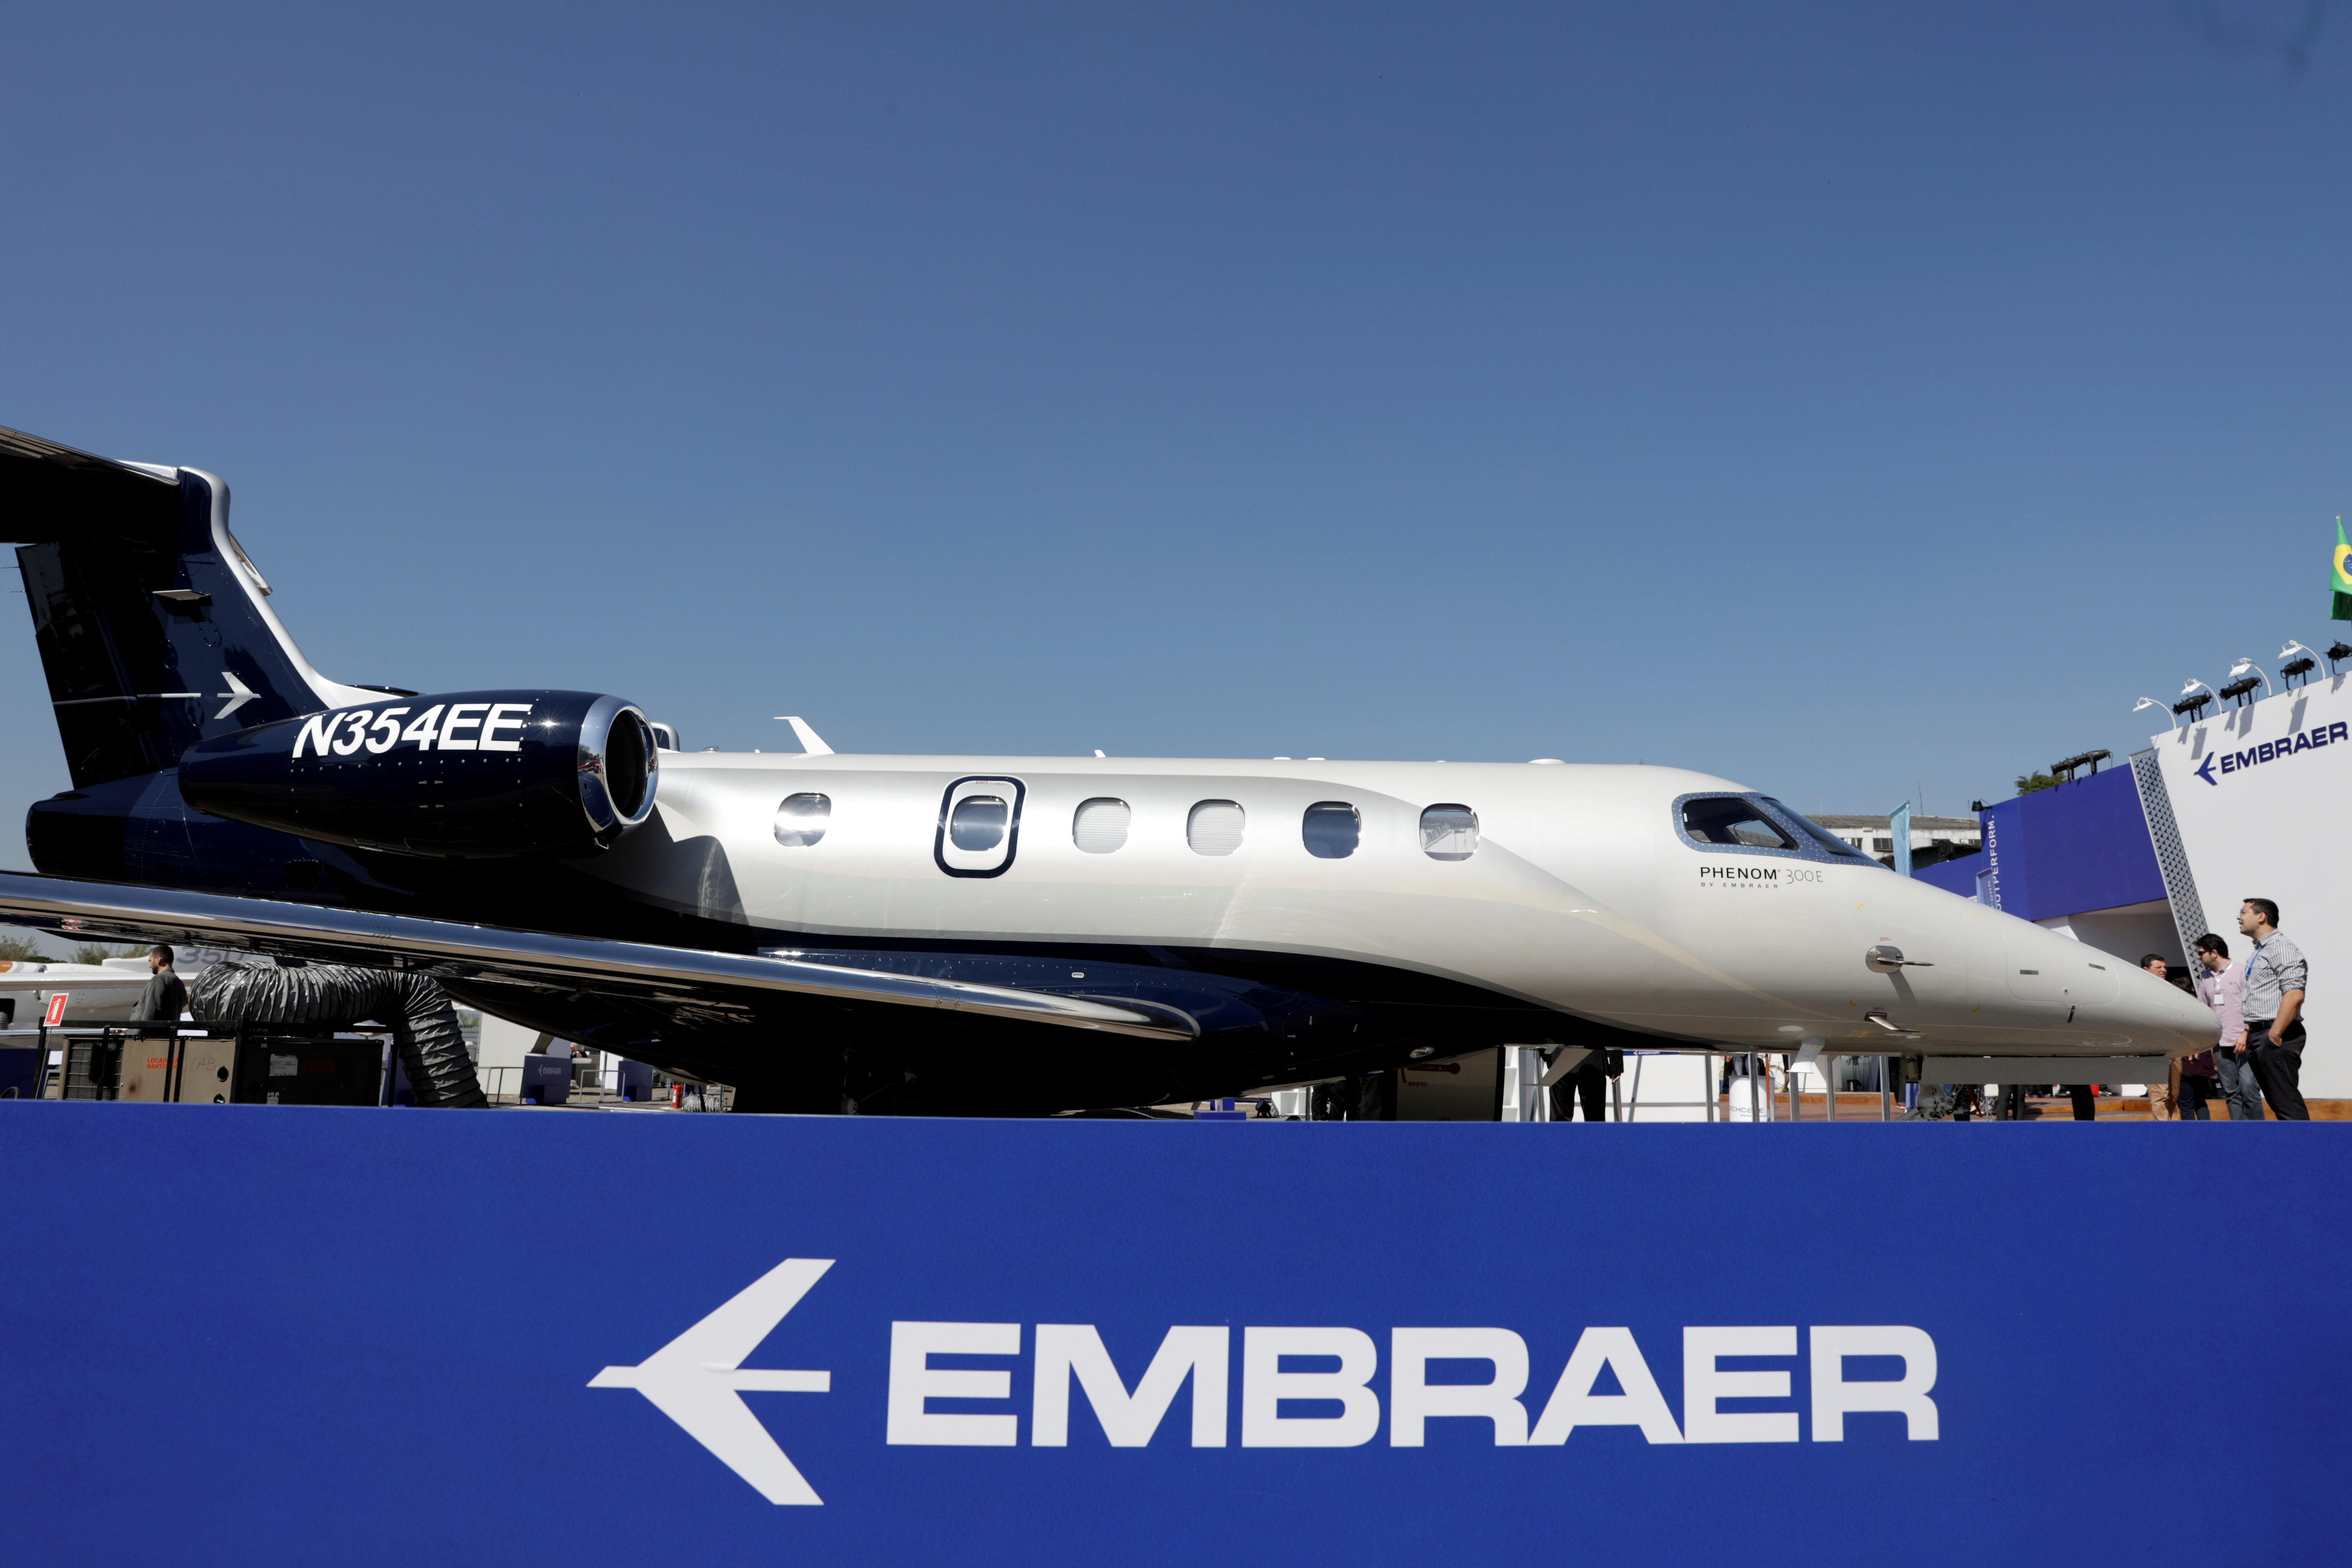 Embraer Phenom 300E aircraft at LABACE in Sao Paulo